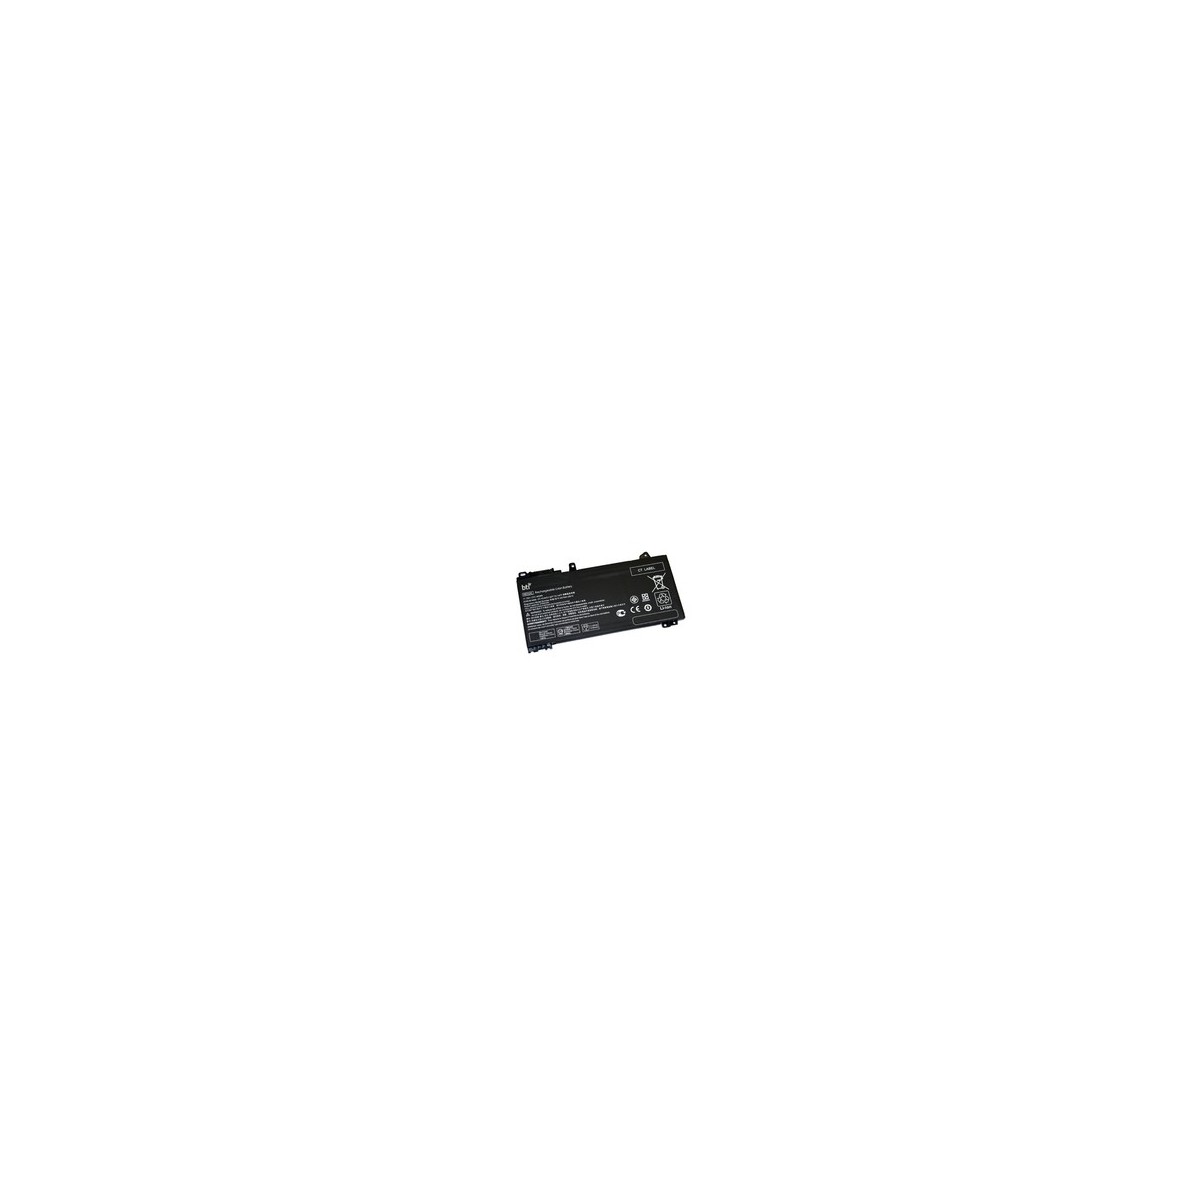 Origin Storage Replacement 3 cell battery for HP Probook 430 G6 430 G7 440 G6 445 G6 440 G7 450 G6 450 G7 455R G6 replacing OEM 